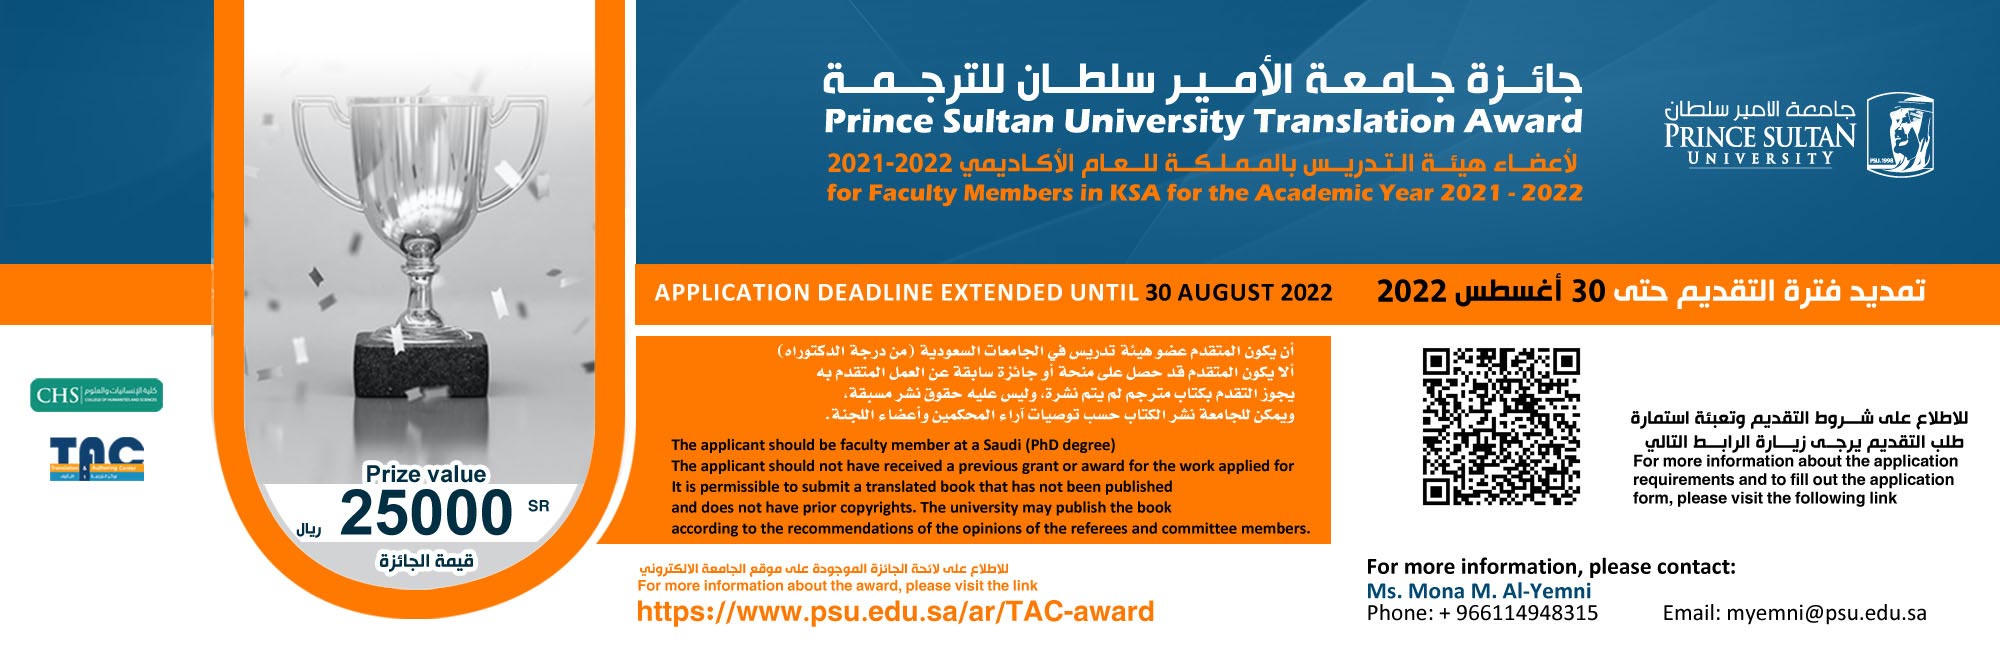 Prince Sultan University Translation Award for Faculty - A.Y. 2021-2022